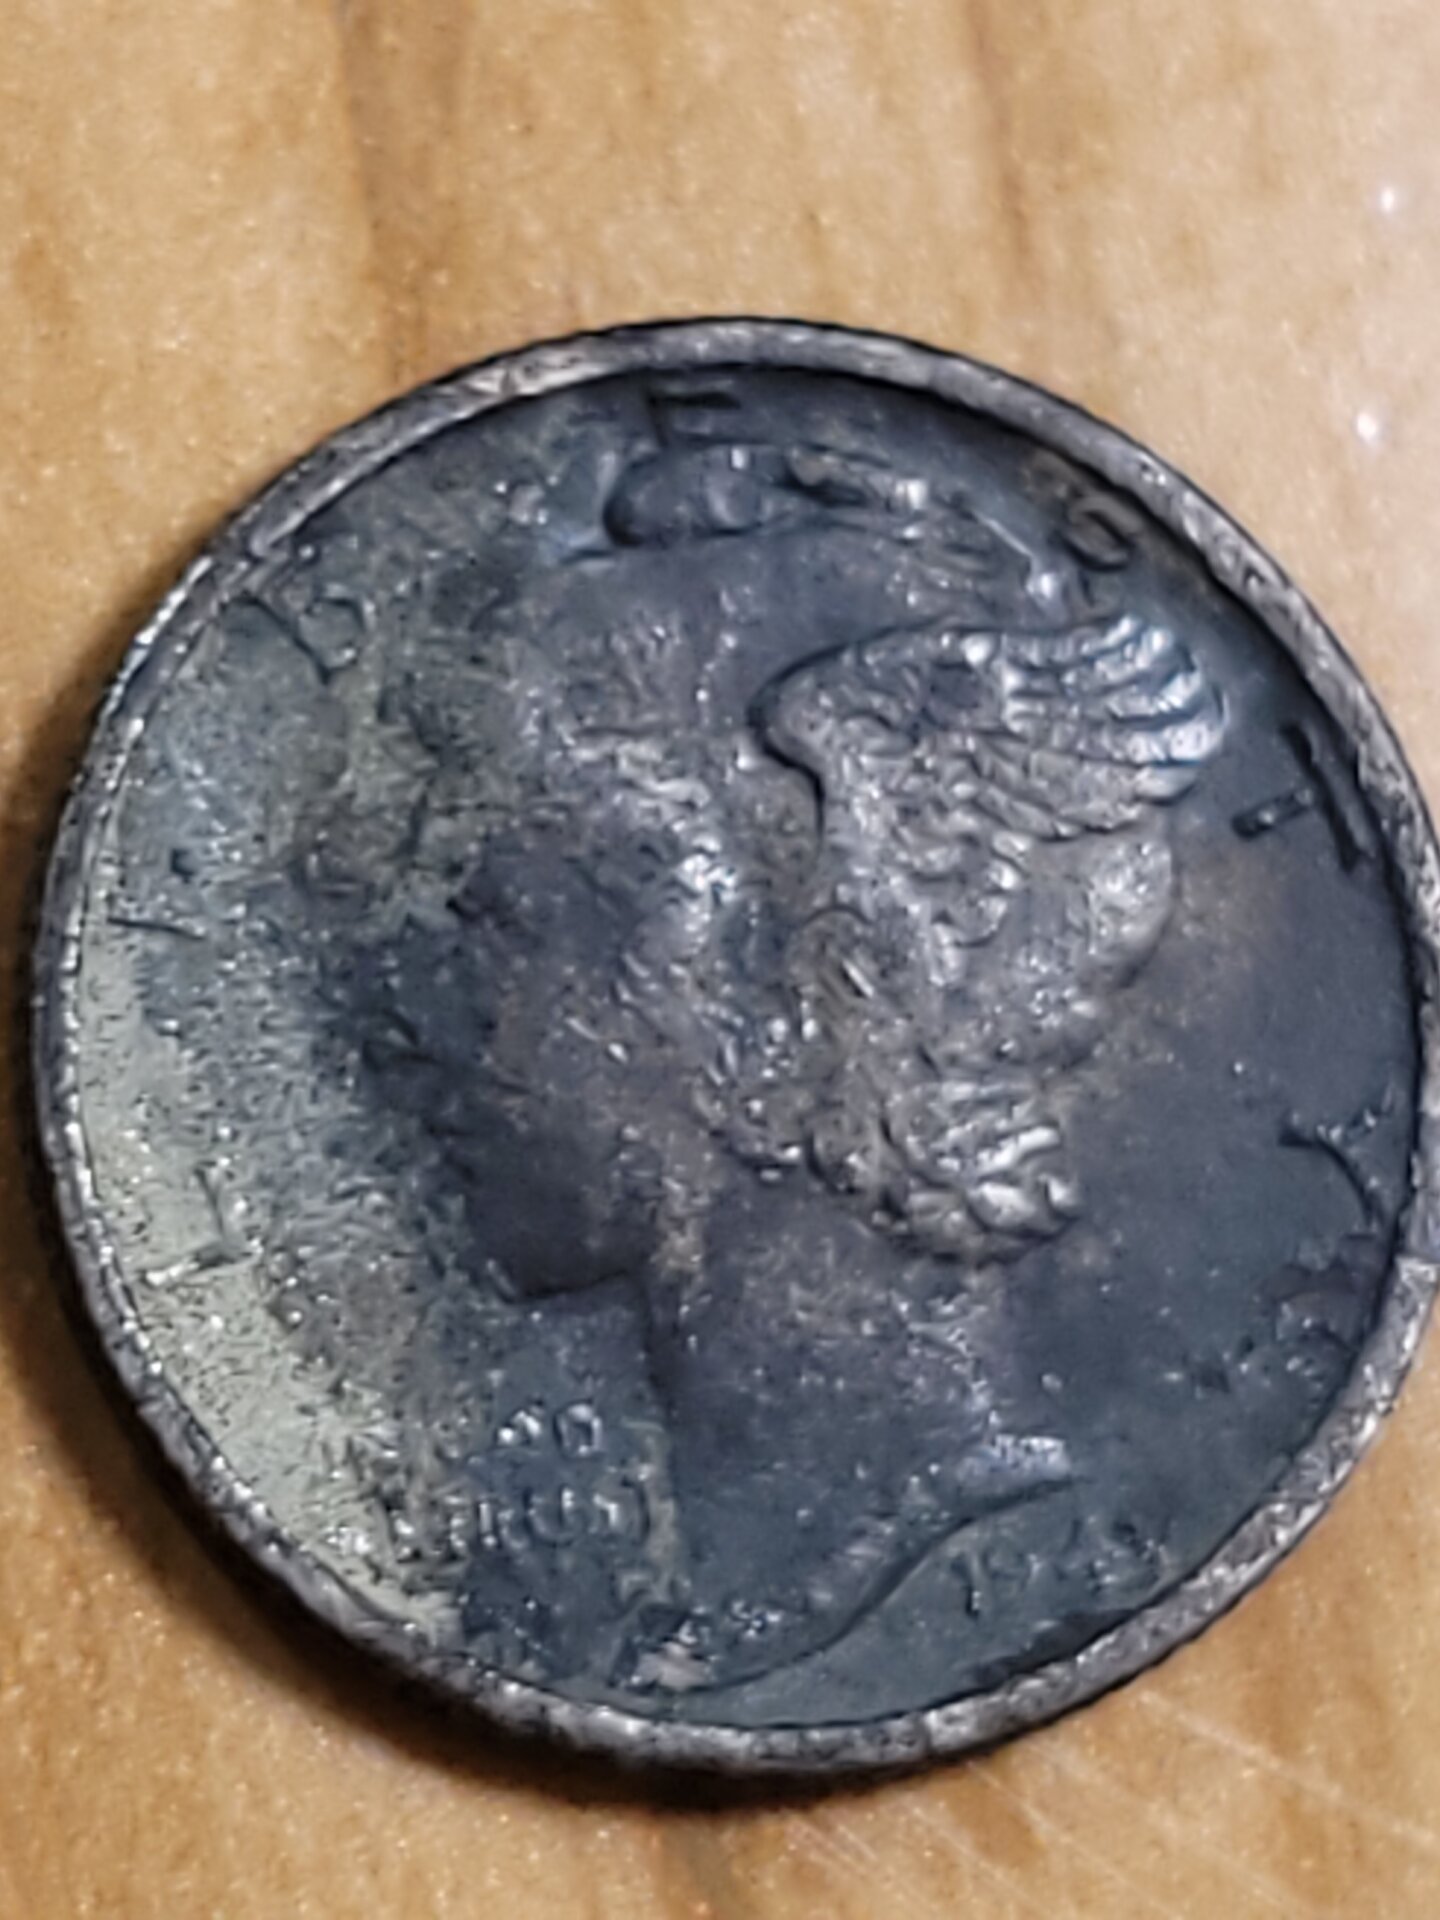 How to Clean Old Coins  Should I Clean My Coins?